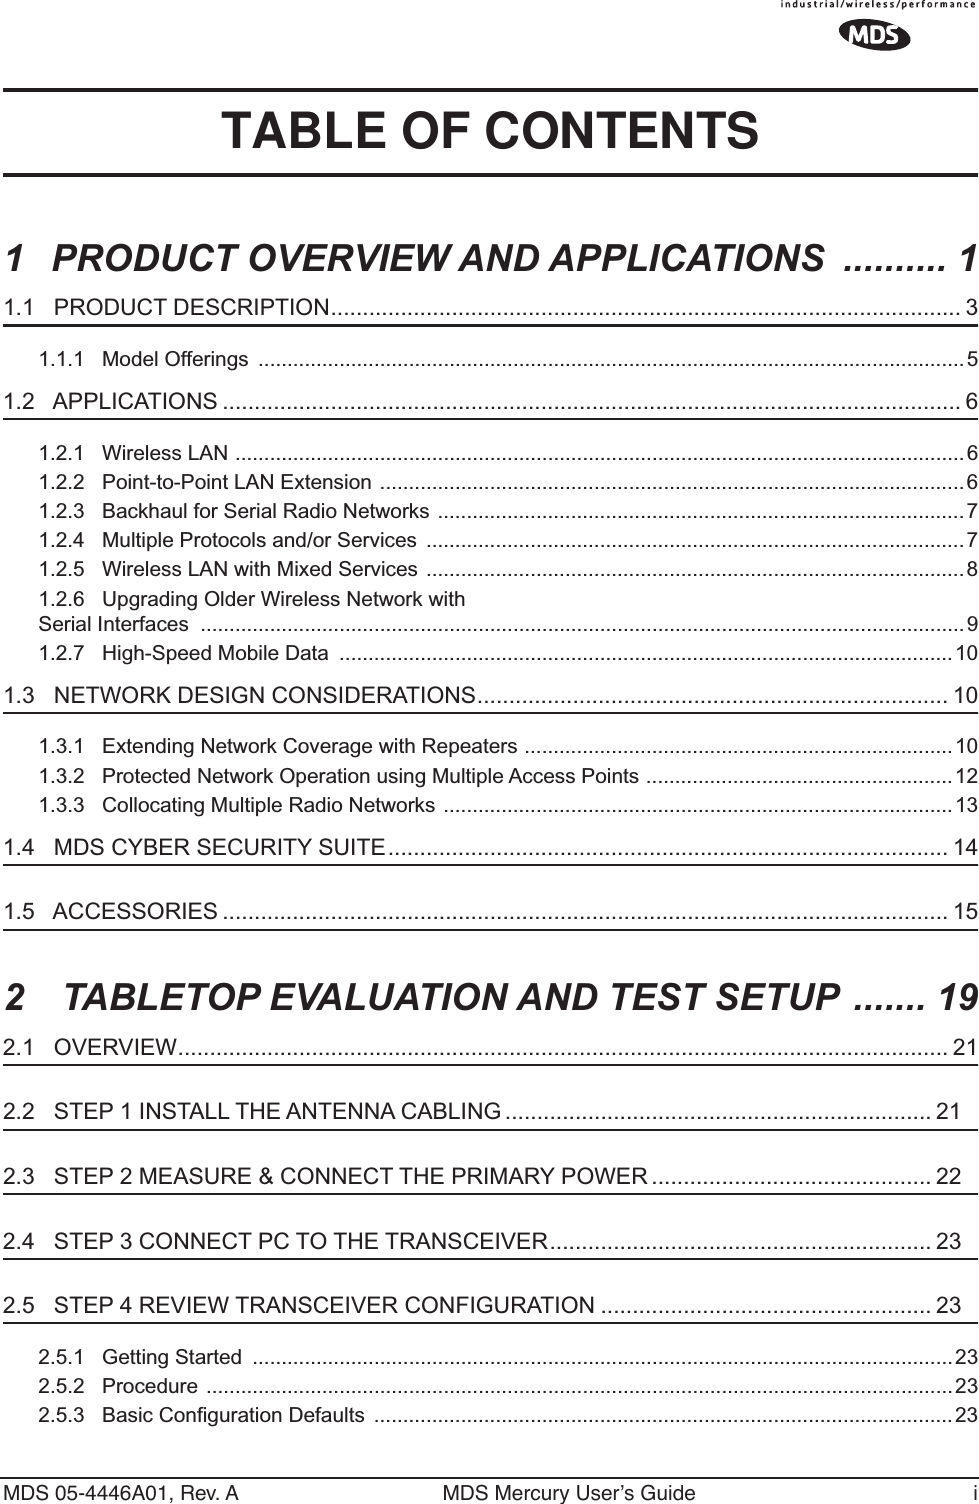  MDS 05-4446A01, Rev. A MDS Mercury User’s Guide i TABLE OF CONTENTS 1PRODUCT OVERVIEW AND APPLICATIONS  .......... 1 1.1   PRODUCT DESCRIPTION................................................................................................... 3 1.1.1   Model Offerings  ..........................................................................................................................5 1.2   APPLICATIONS .................................................................................................................... 6 1.2.1   Wireless LAN ..............................................................................................................................61.2.2   Point-to-Point LAN Extension .....................................................................................................61.2.3   Backhaul for Serial Radio Networks ...........................................................................................71.2.4   Multiple Protocols and/or Services  .............................................................................................71.2.5   Wireless LAN with Mixed Services .............................................................................................81.2.6   Upgrading Older Wireless Network with Serial Interfaces  ....................................................................................................................................91.2.7   High-Speed Mobile Data  ..........................................................................................................10 1.3   NETWORK DESIGN CONSIDERATIONS.......................................................................... 10 1.3.1   Extending Network Coverage with Repeaters ..........................................................................101.3.2   Protected Network Operation using Multiple Access Points .....................................................121.3.3   Collocating Multiple Radio Networks ........................................................................................13 1.4   MDS CYBER SECURITY SUITE........................................................................................ 14 1.5   ACCESSORIES .................................................................................................................. 15 2 TABLETOP EVALUATION AND TEST SETUP  ....... 19 2.1   OVERVIEW......................................................................................................................... 21 2.2   STEP 1 INSTALL THE ANTENNA CABLING ................................................................... 21 2.3   STEP 2 MEASURE &amp; CONNECT THE PRIMARY POWER ............................................ 22 2.4   STEP 3 CONNECT PC TO THE TRANSCEIVER............................................................ 23 2.5   STEP 4 REVIEW TRANSCEIVER CONFIGURATION .................................................... 23 2.5.1   Getting Started  .........................................................................................................................232.5.2   Procedure .................................................................................................................................232.5.3   Basic Configuration Defaults  ....................................................................................................23